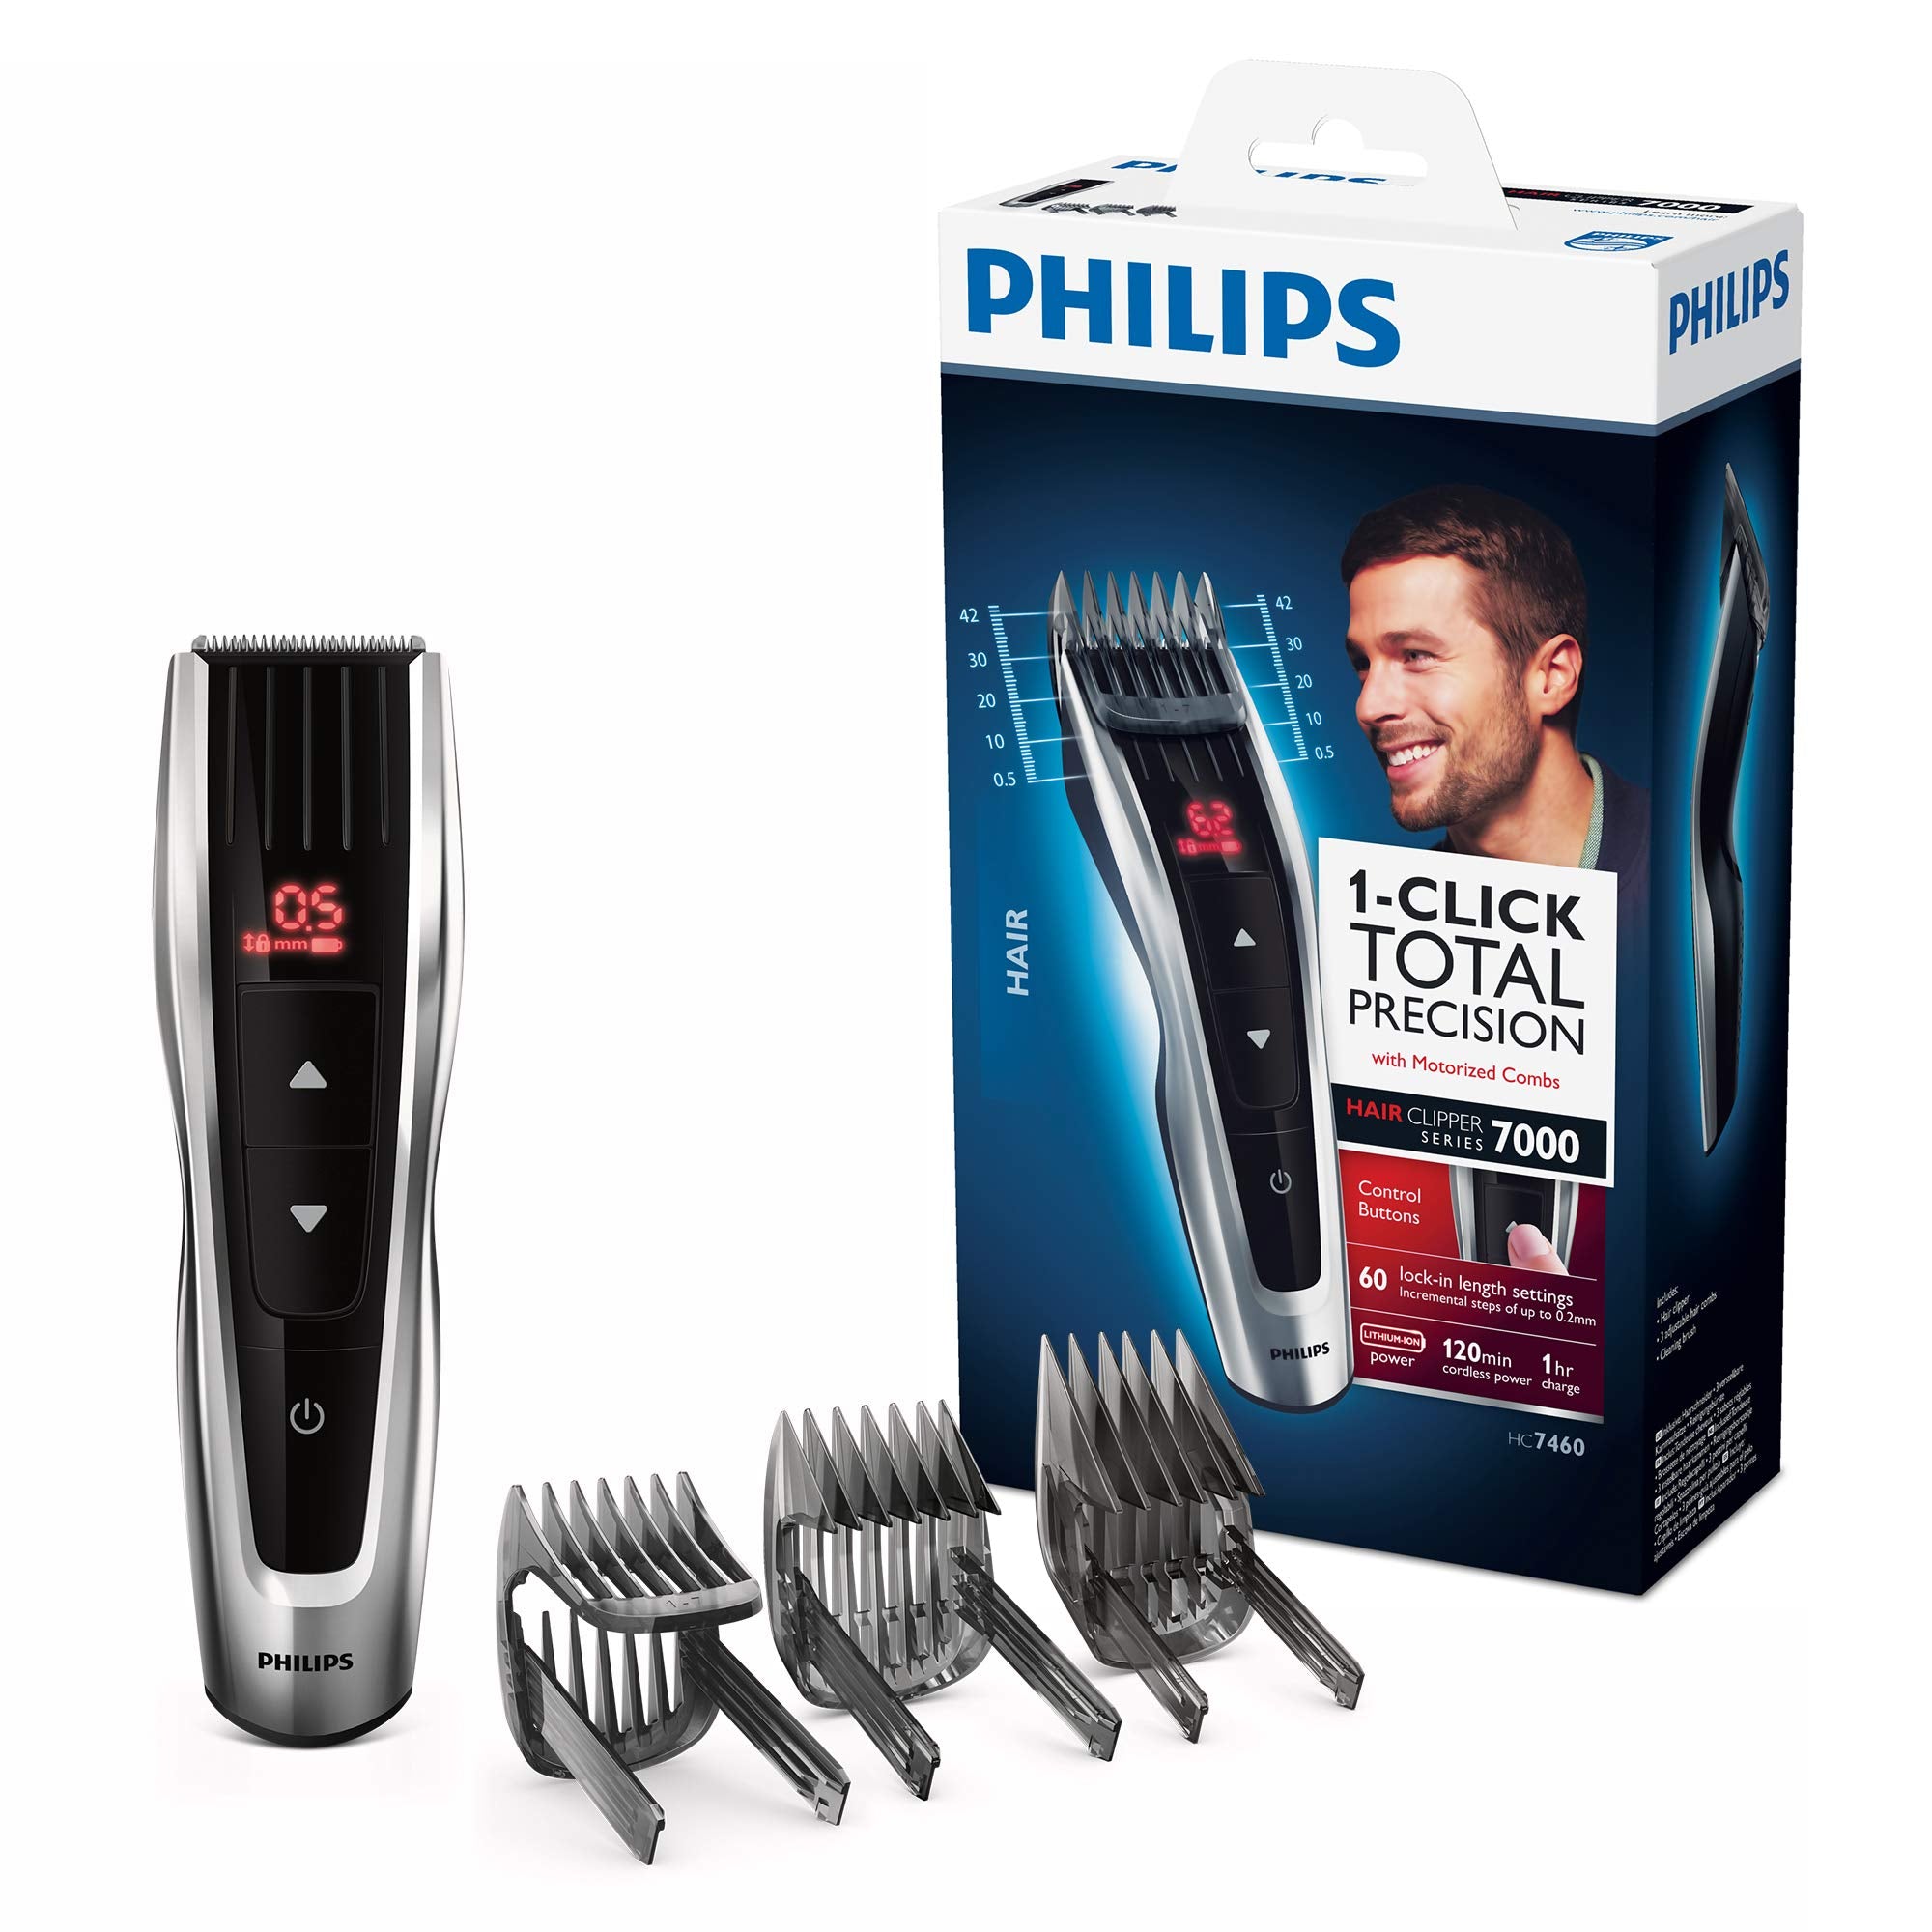 philips hair trimmer 7000 series